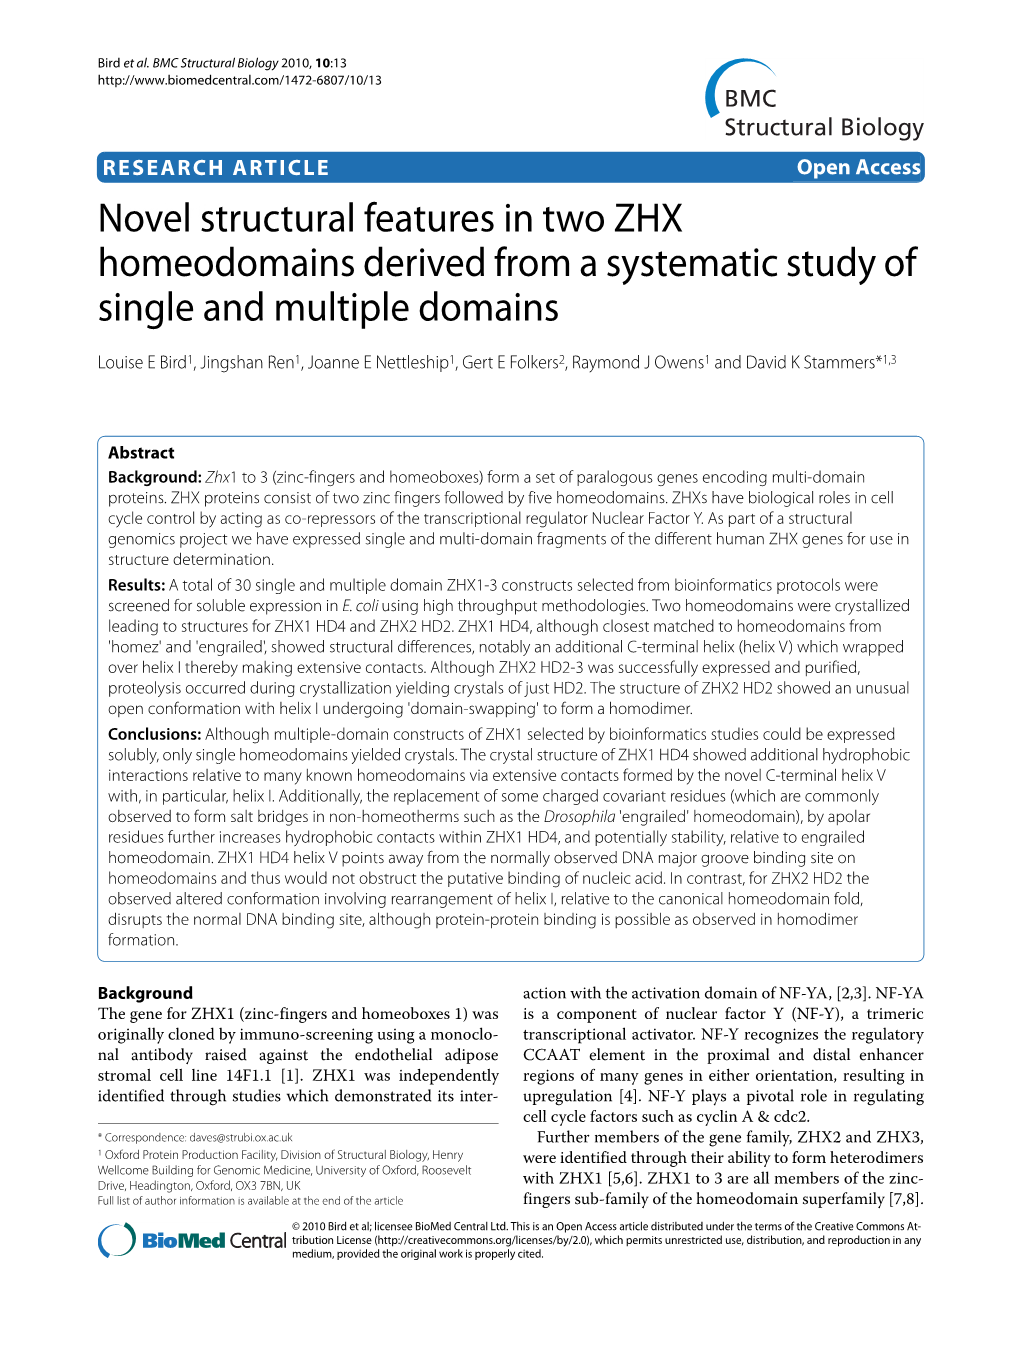 Novel Structural Features in Two ZHX Homeodomains